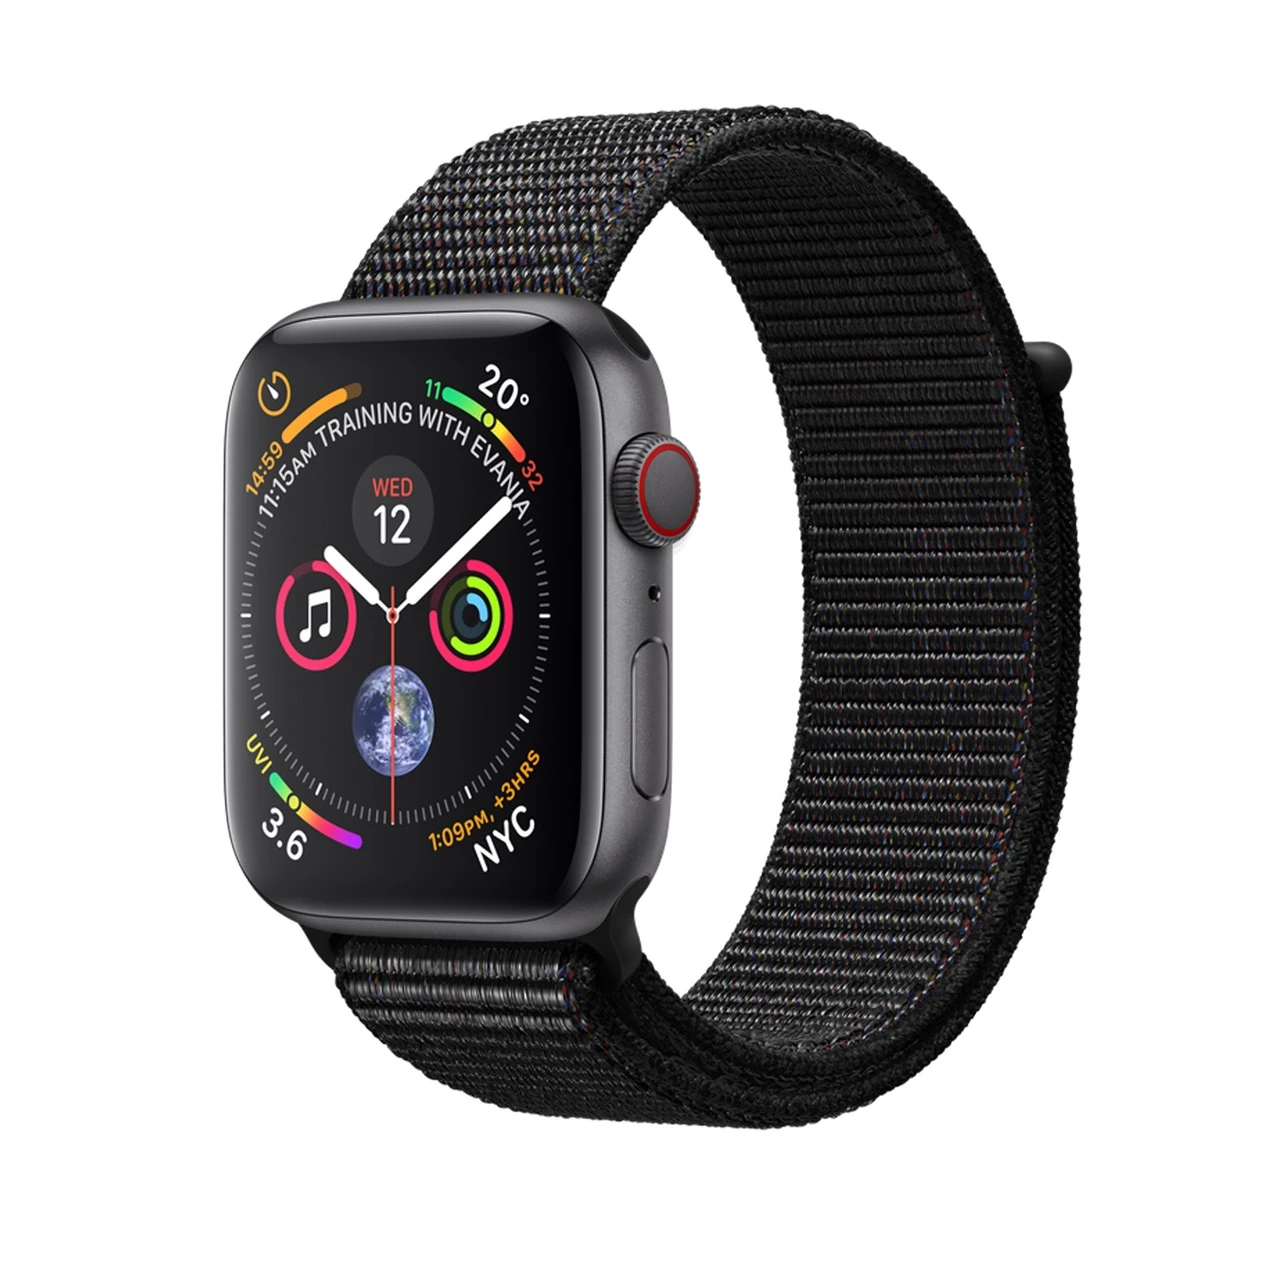 Apple Watch Series 4 (GPS + Cellular) 40mm Space Gray Aluminium Case with Black Sport Loop (MTUH2, MTVF2)